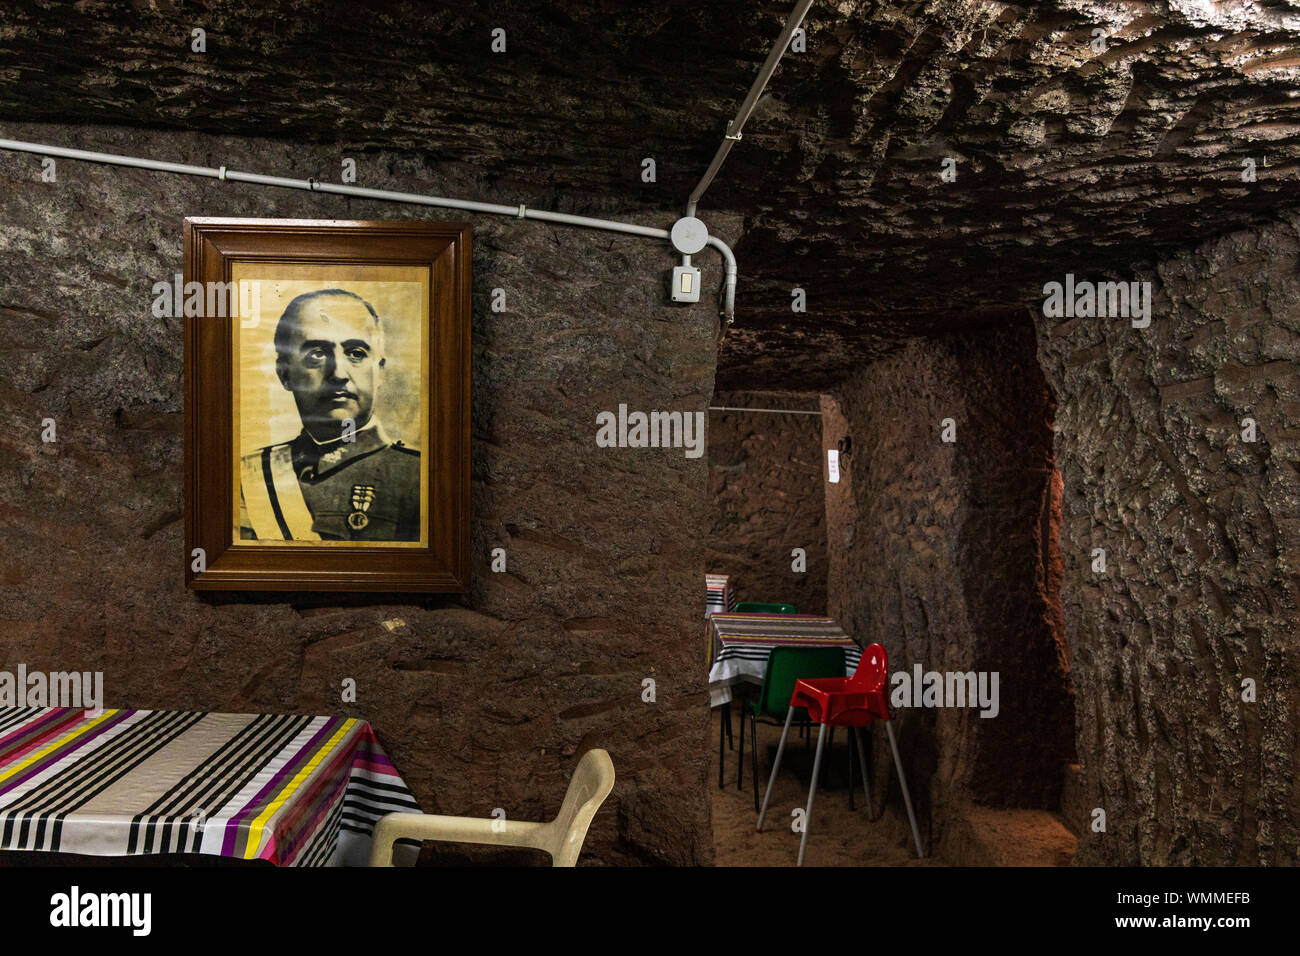 Black and white framed photograph of Franco, dictator of Spain hanging in a cave room of a Guachinche restaurant in Barranco Grande, Anaga, Tenerife, Stock Photo